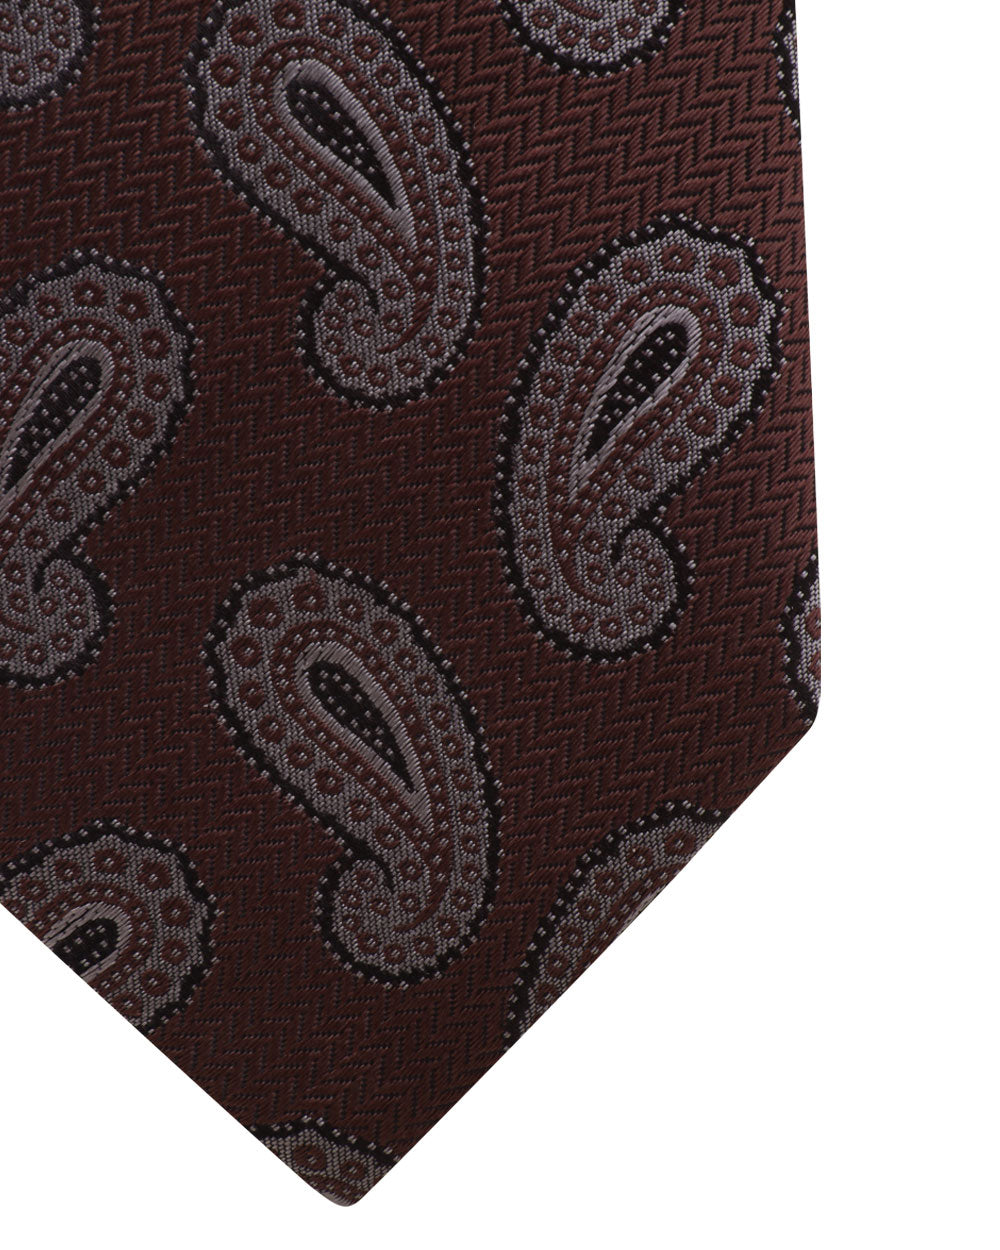 Brown and Grey Paisley Tie